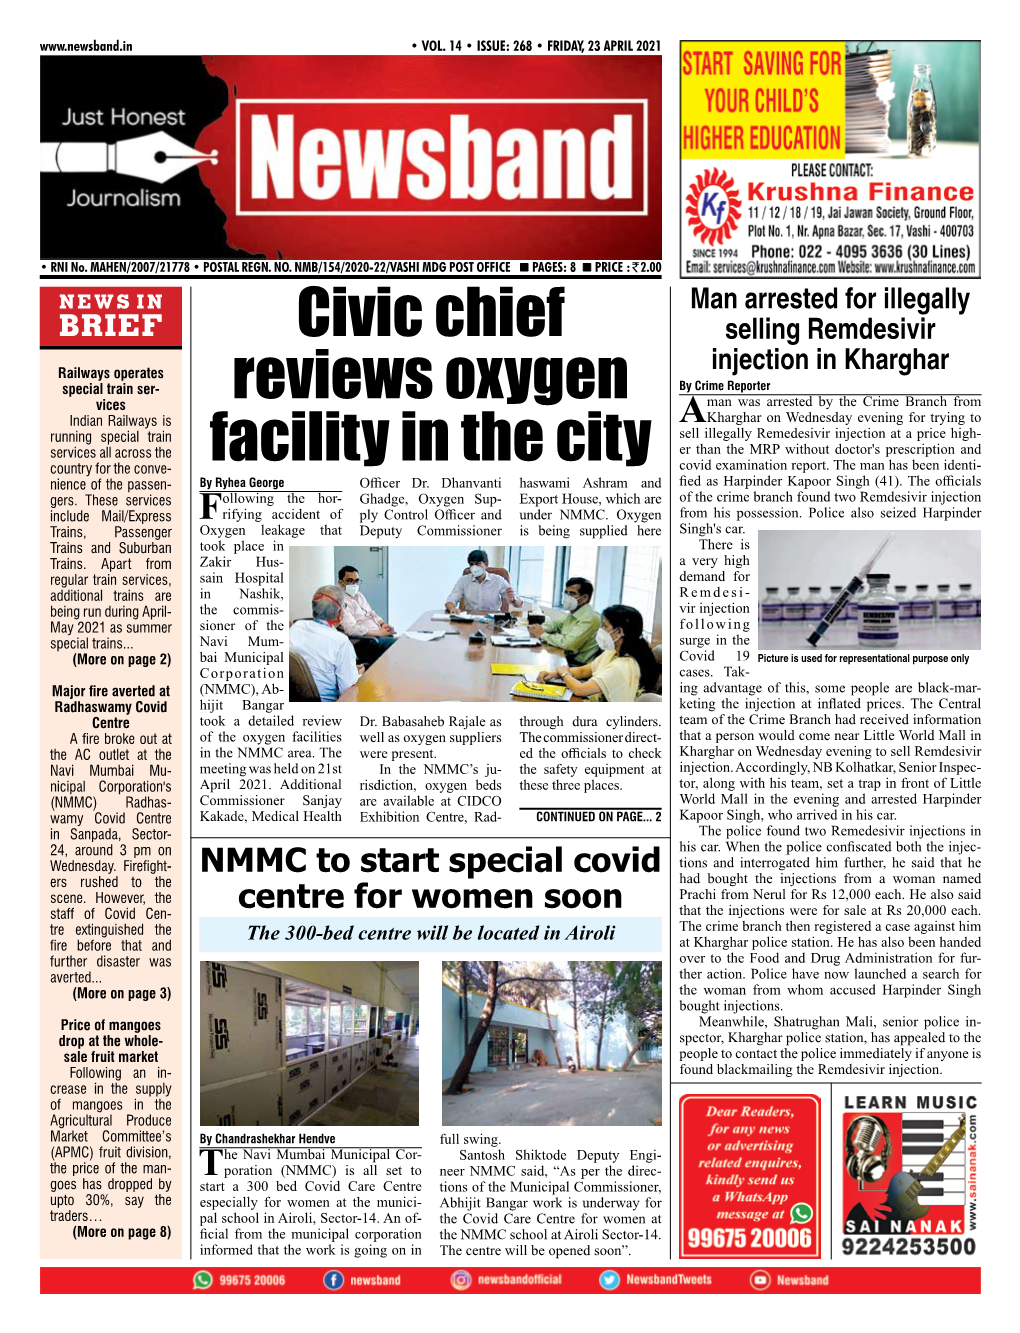 Civic Chief Reviews Oxygen Facility in the City